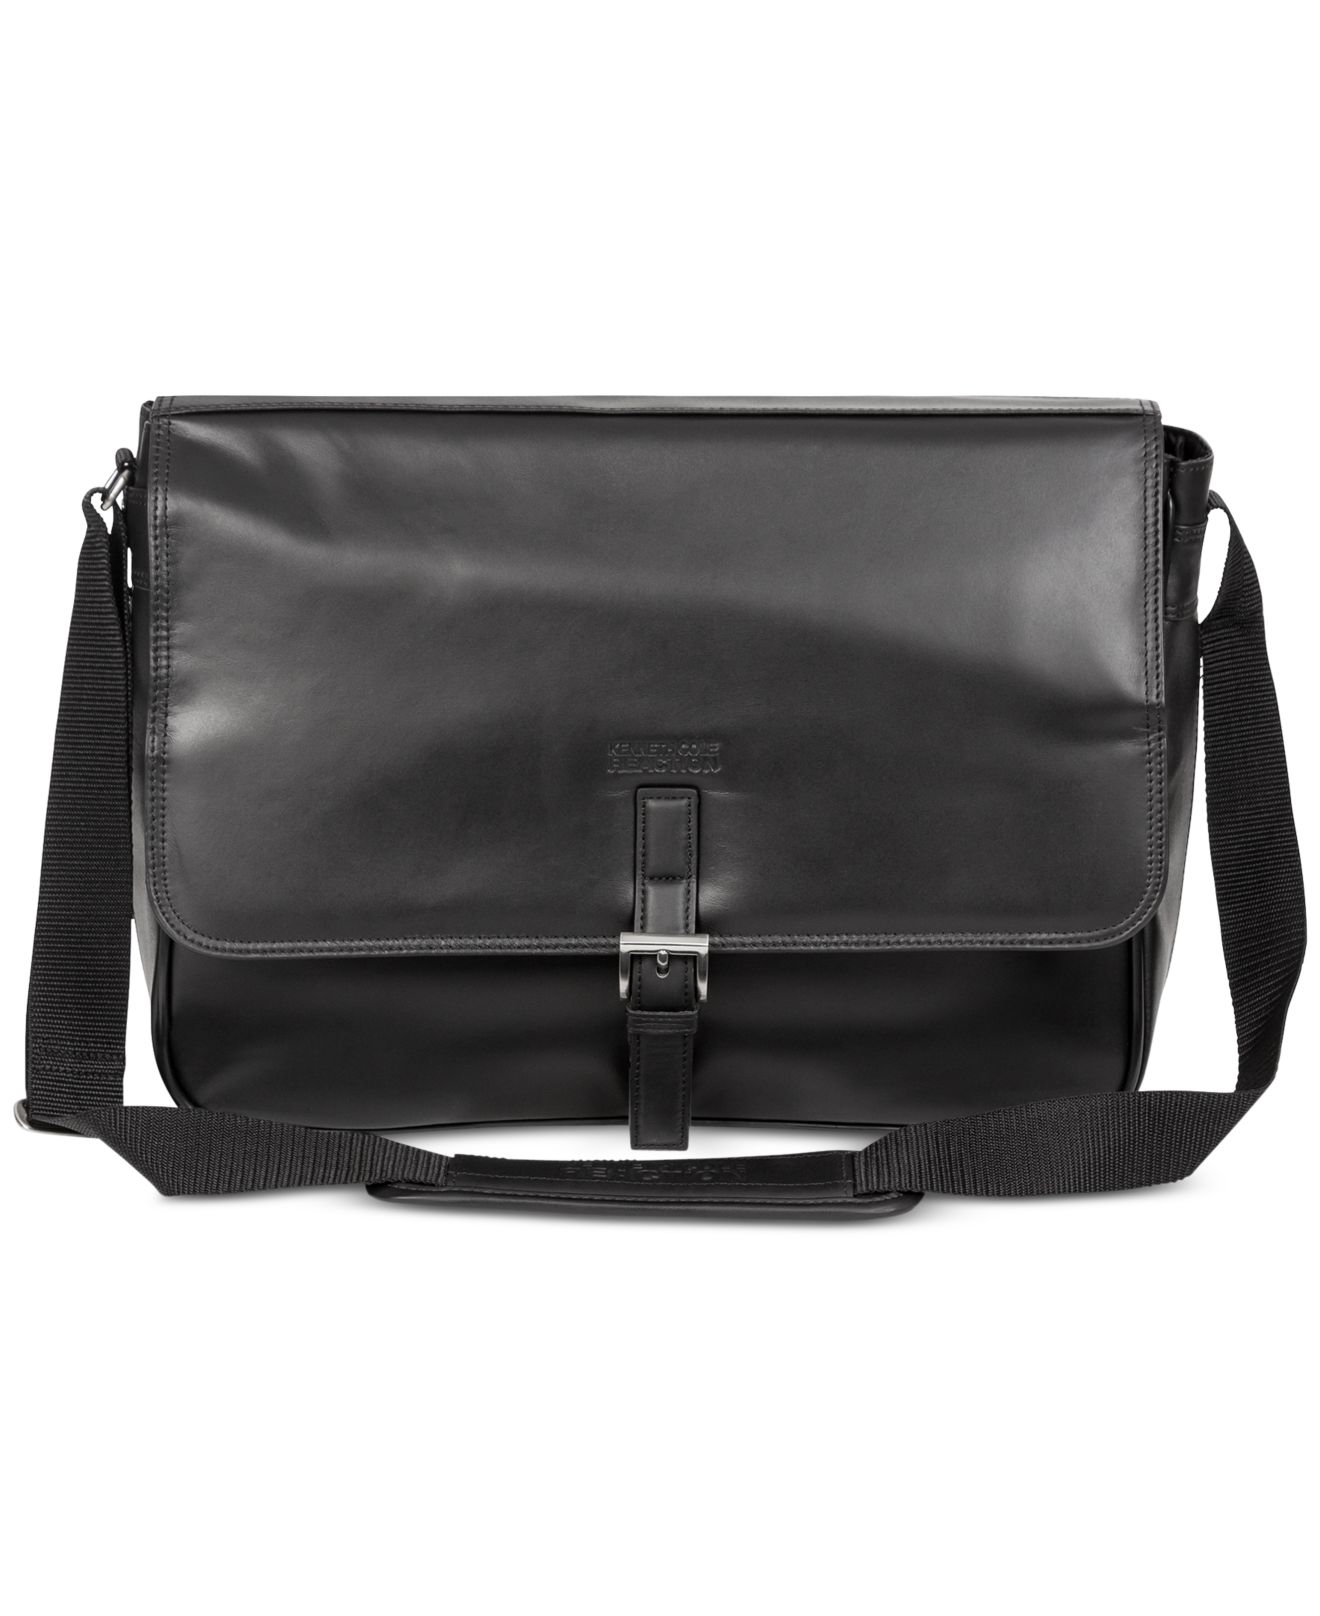 Lyst - Kenneth cole reaction Manhattan Leather What A Bag Expandable ...